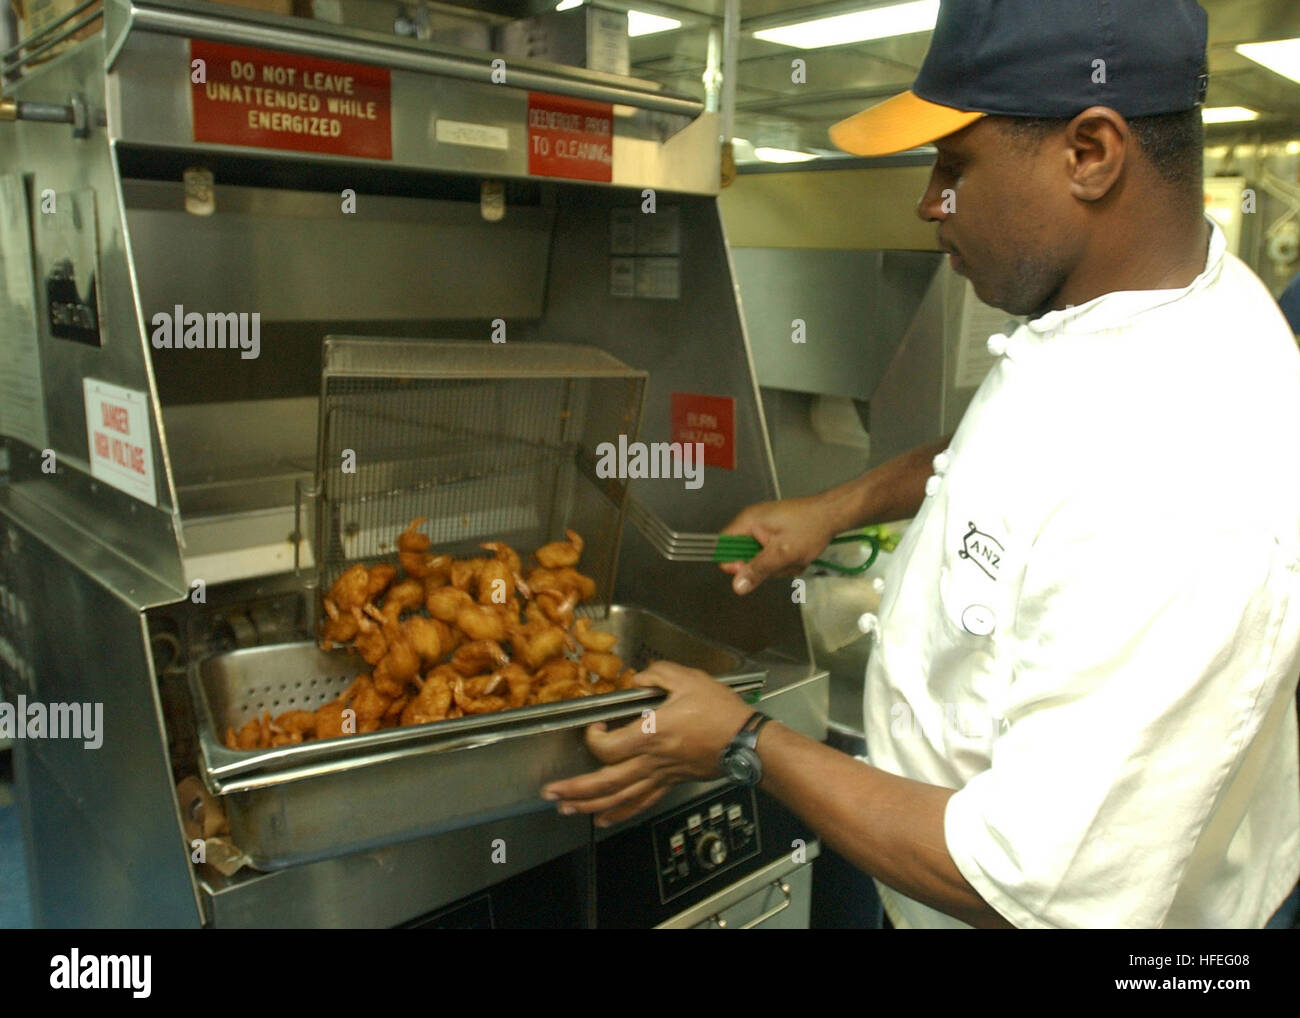 030224-N-6141B-158 The Mediterranean (Feb. 24, 2003) -- Mess Management Specialist 2nd Class Kenneth  Mayberry of Detroit, Mich., prepares butterfly fried shrimp in the galley aboard the guided missile cruiser USS Anzio (CG 68).  The Anzio is on a regularly scheduled deployment in support of Operation Enduring Freedom.  U.S. Navy photo by JOC Alan J. Baribeau.  (RELEASED) US Navy 030224-N-6141B-158 Mess Management Specialist 2nd Class Kenneth Mayberry of Detroit, Mich., prepares butterfly fried shrimp in the galley Stock Photo